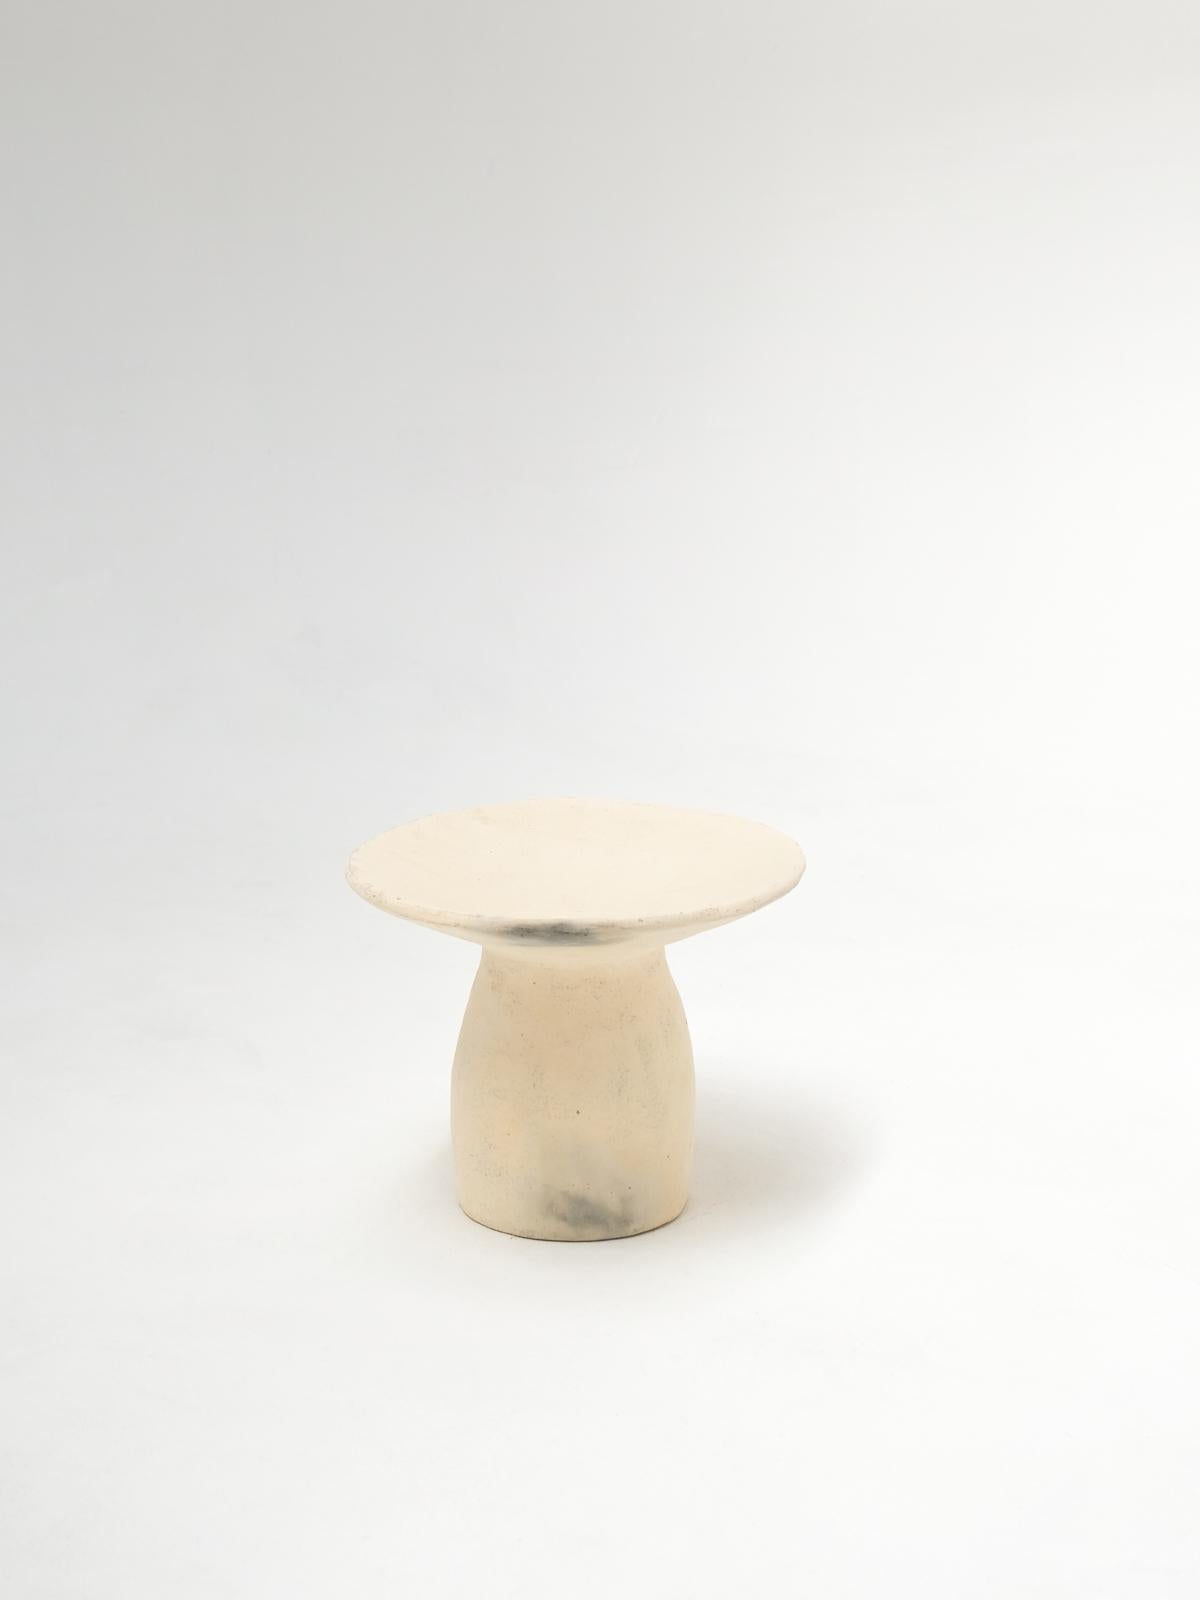 - Handbuilt white small side table, stool for bedroom or living room
- made of clay collected from the potter's surroundings.
- slip applied with natural pigments as whitewash with water
- made in the Moroccan Rif mountains by the potter Houda.
-